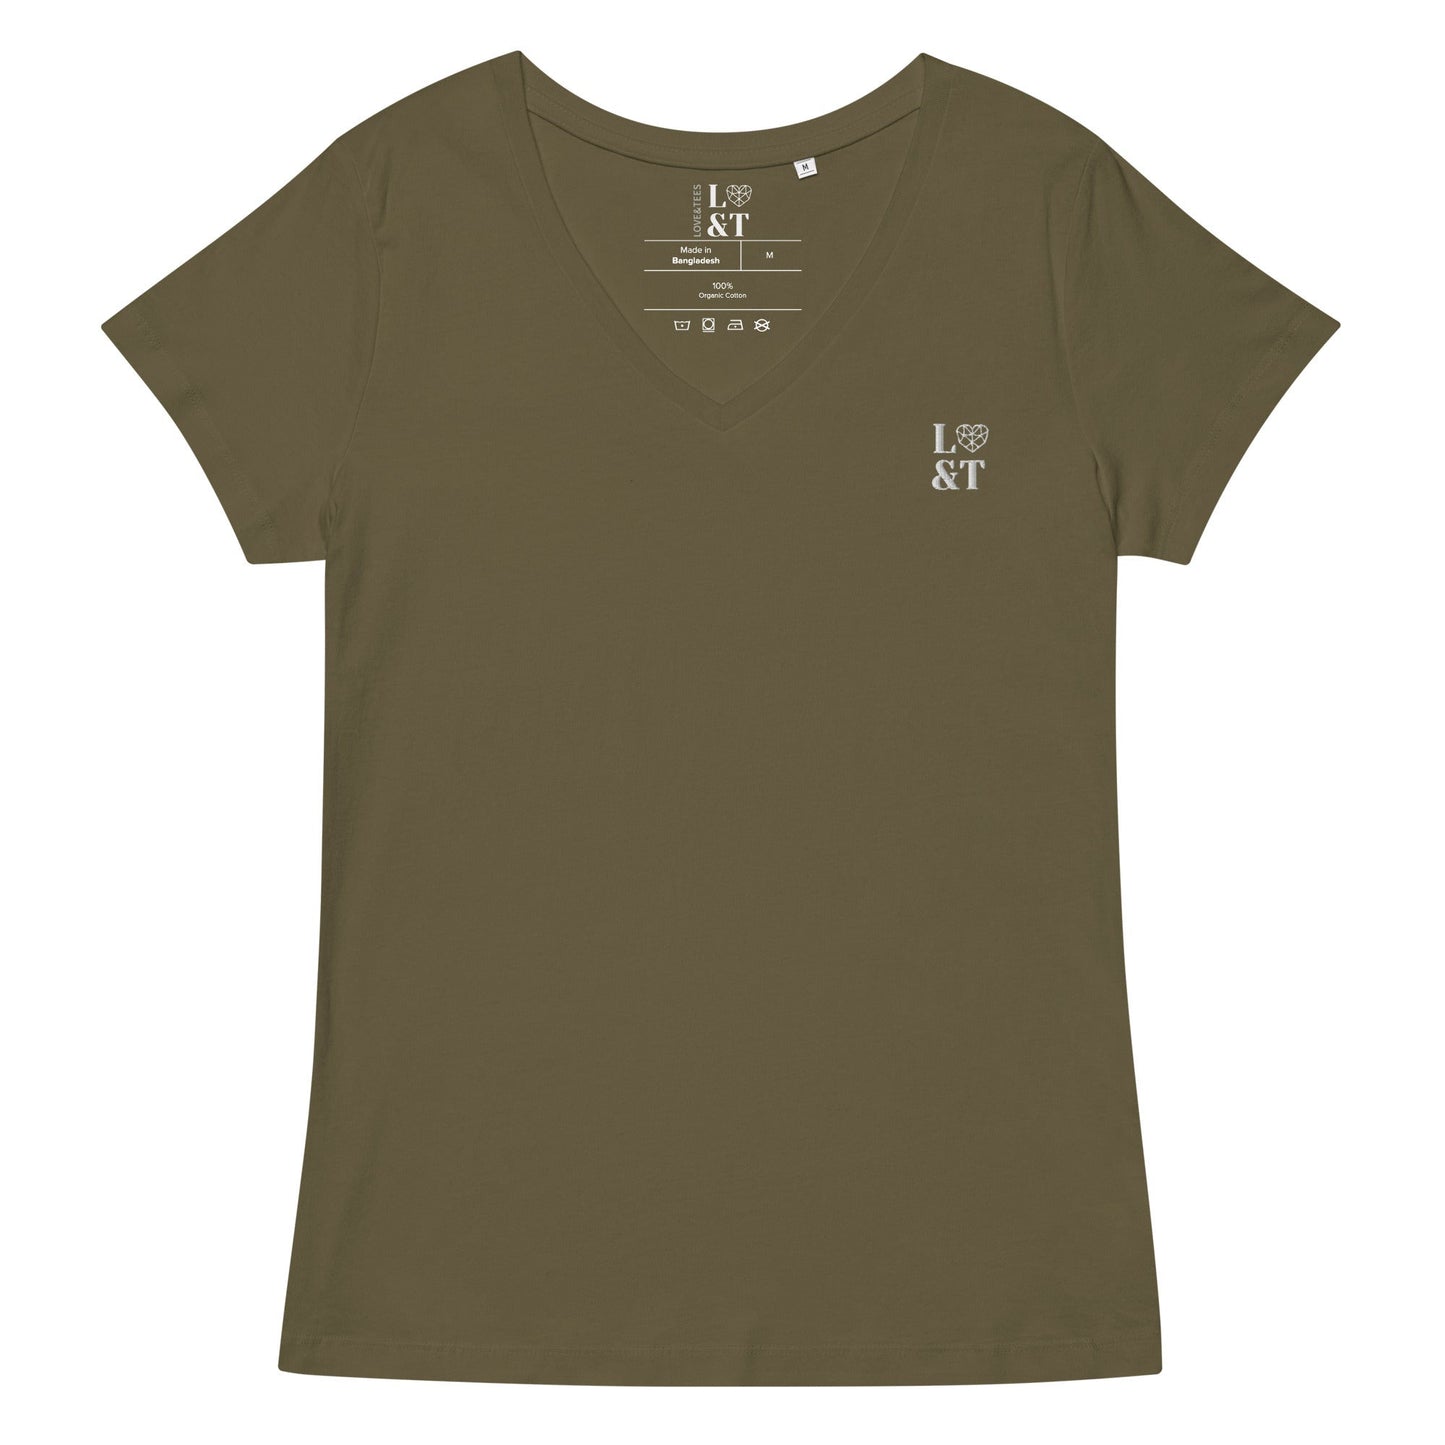 L&T's Women’s Fitted V-Neck T-Shirt